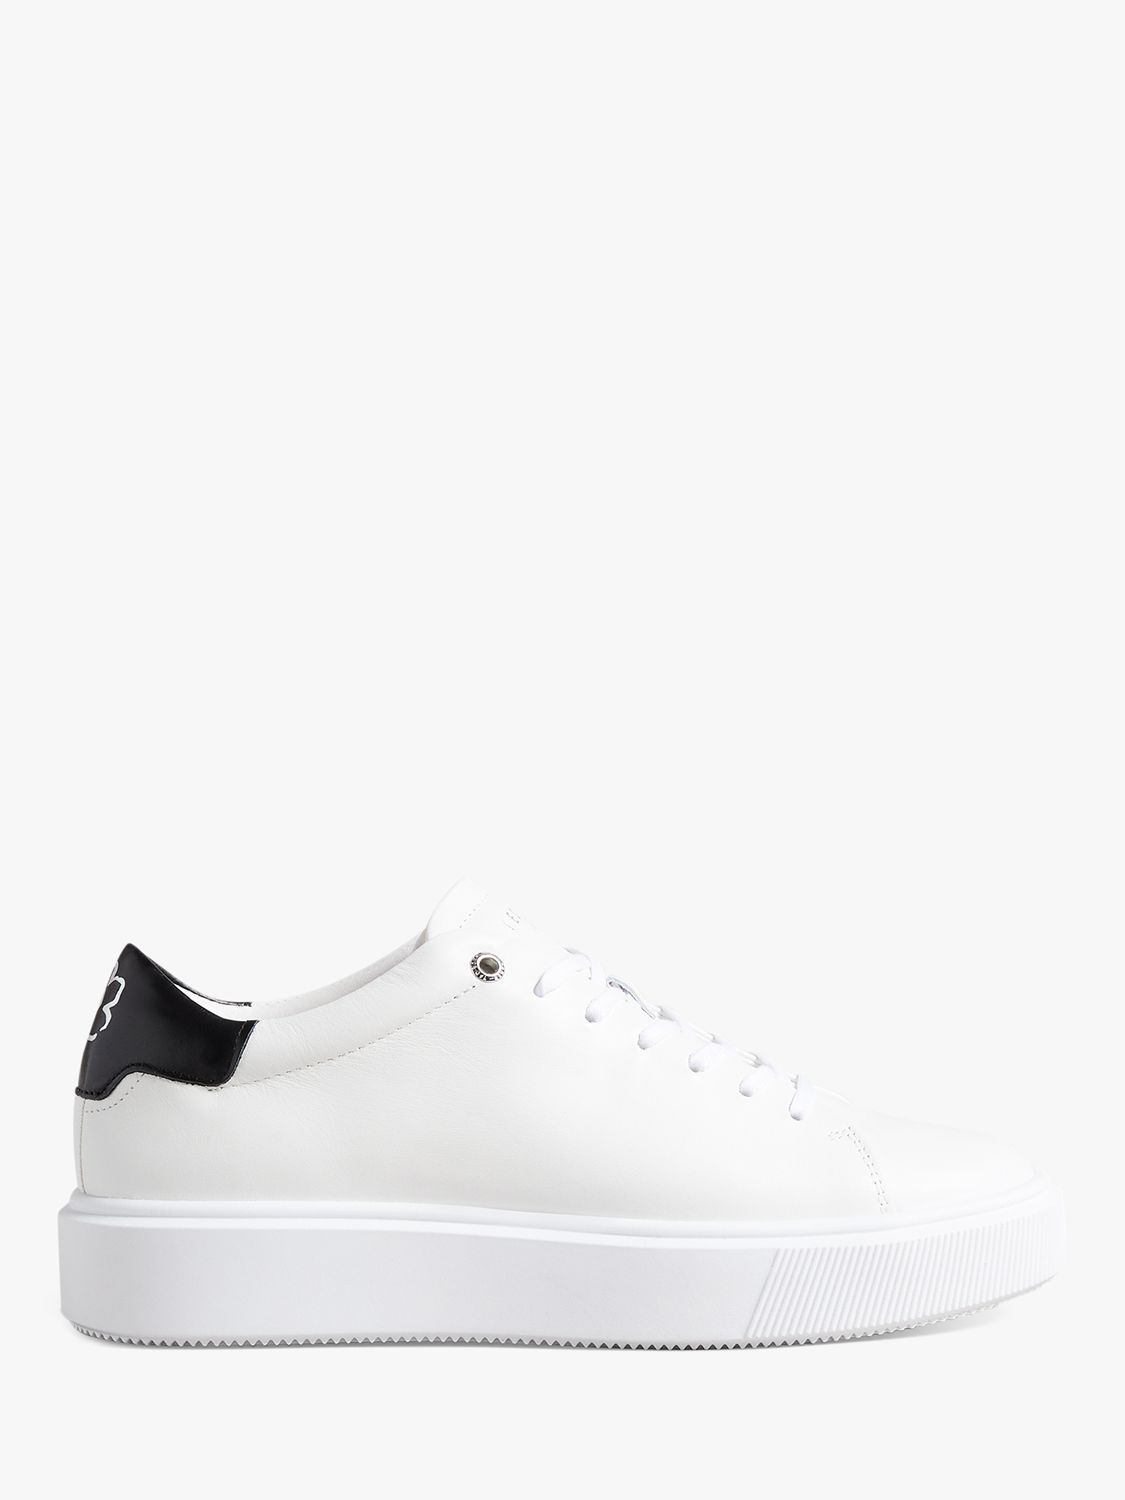 Ted Baker Lornea Leather Chunky Trainers, White at John Lewis & Partners